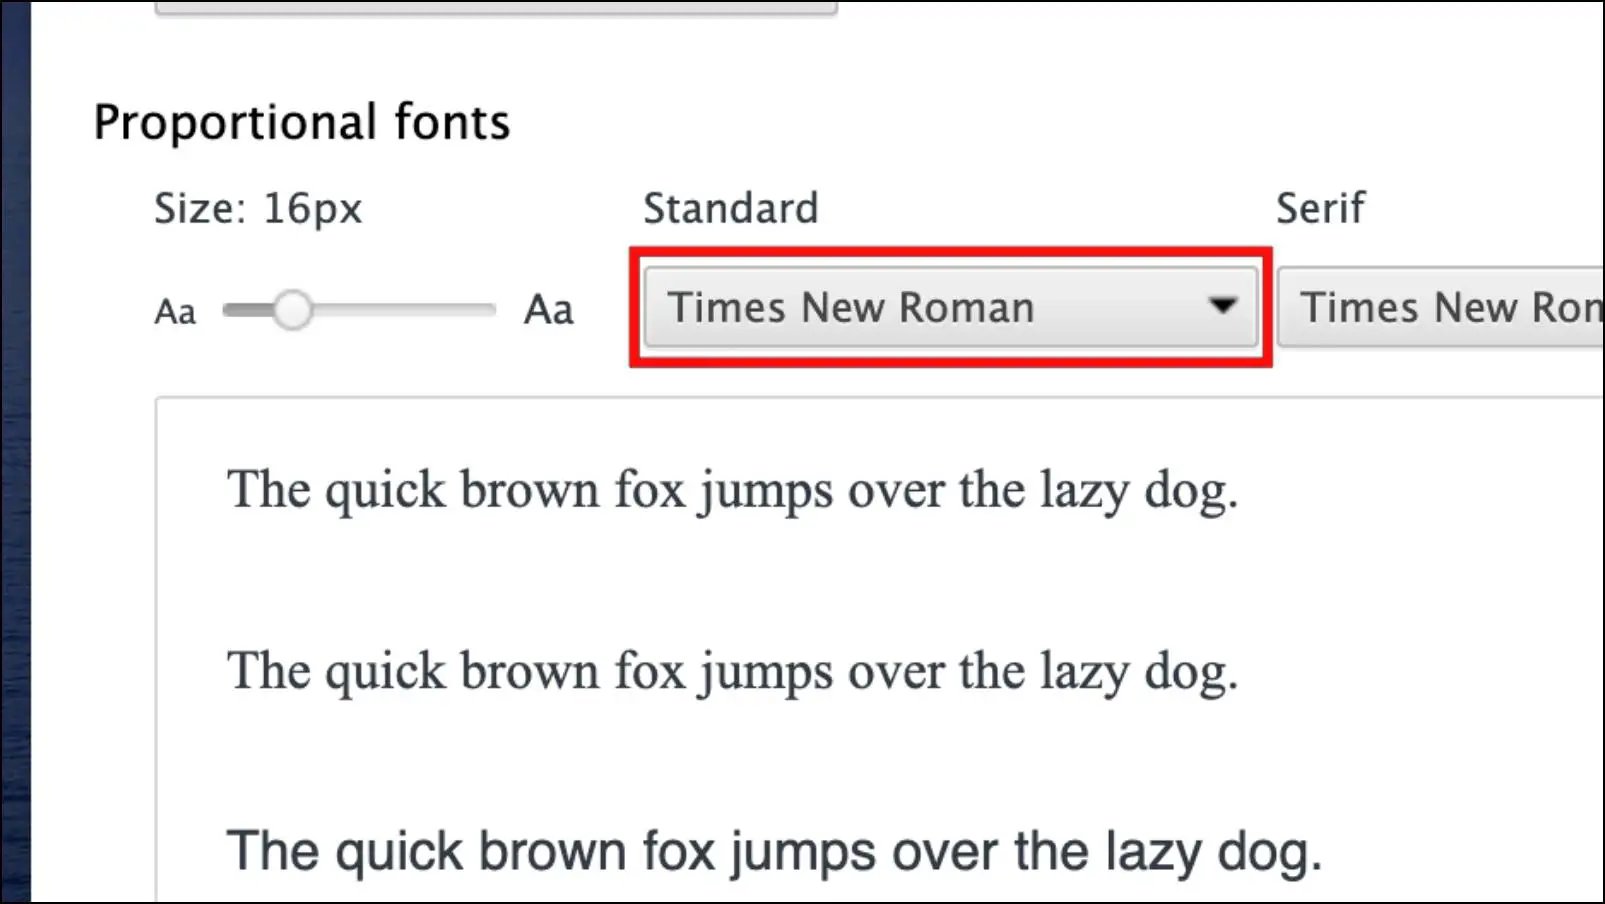 Select Font for the Selected Language